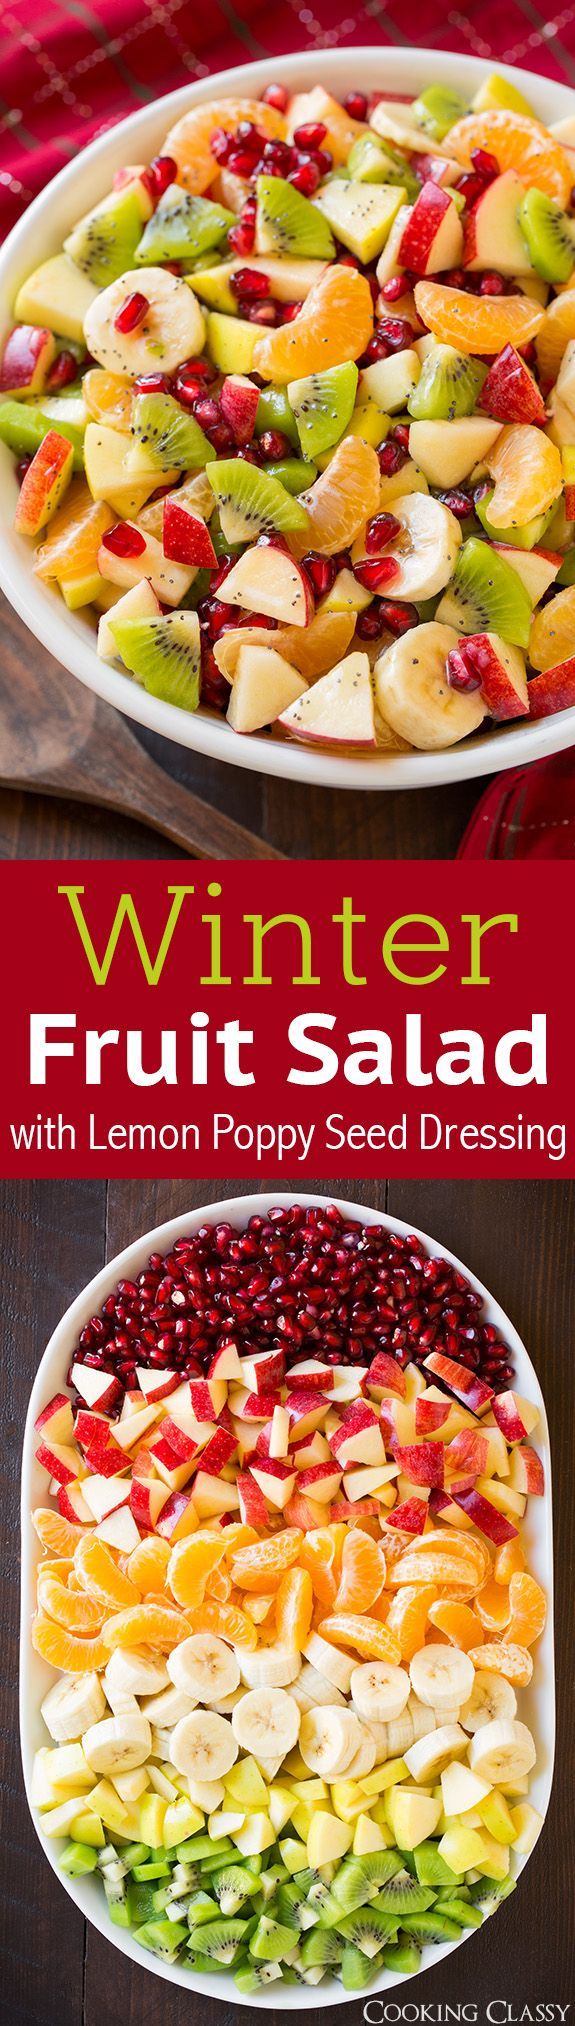 Winter Fruit Salad with Lemon Poppy Seed Dressing – SO GOOD! Perfect colors for the holidays. Everyone loved it!